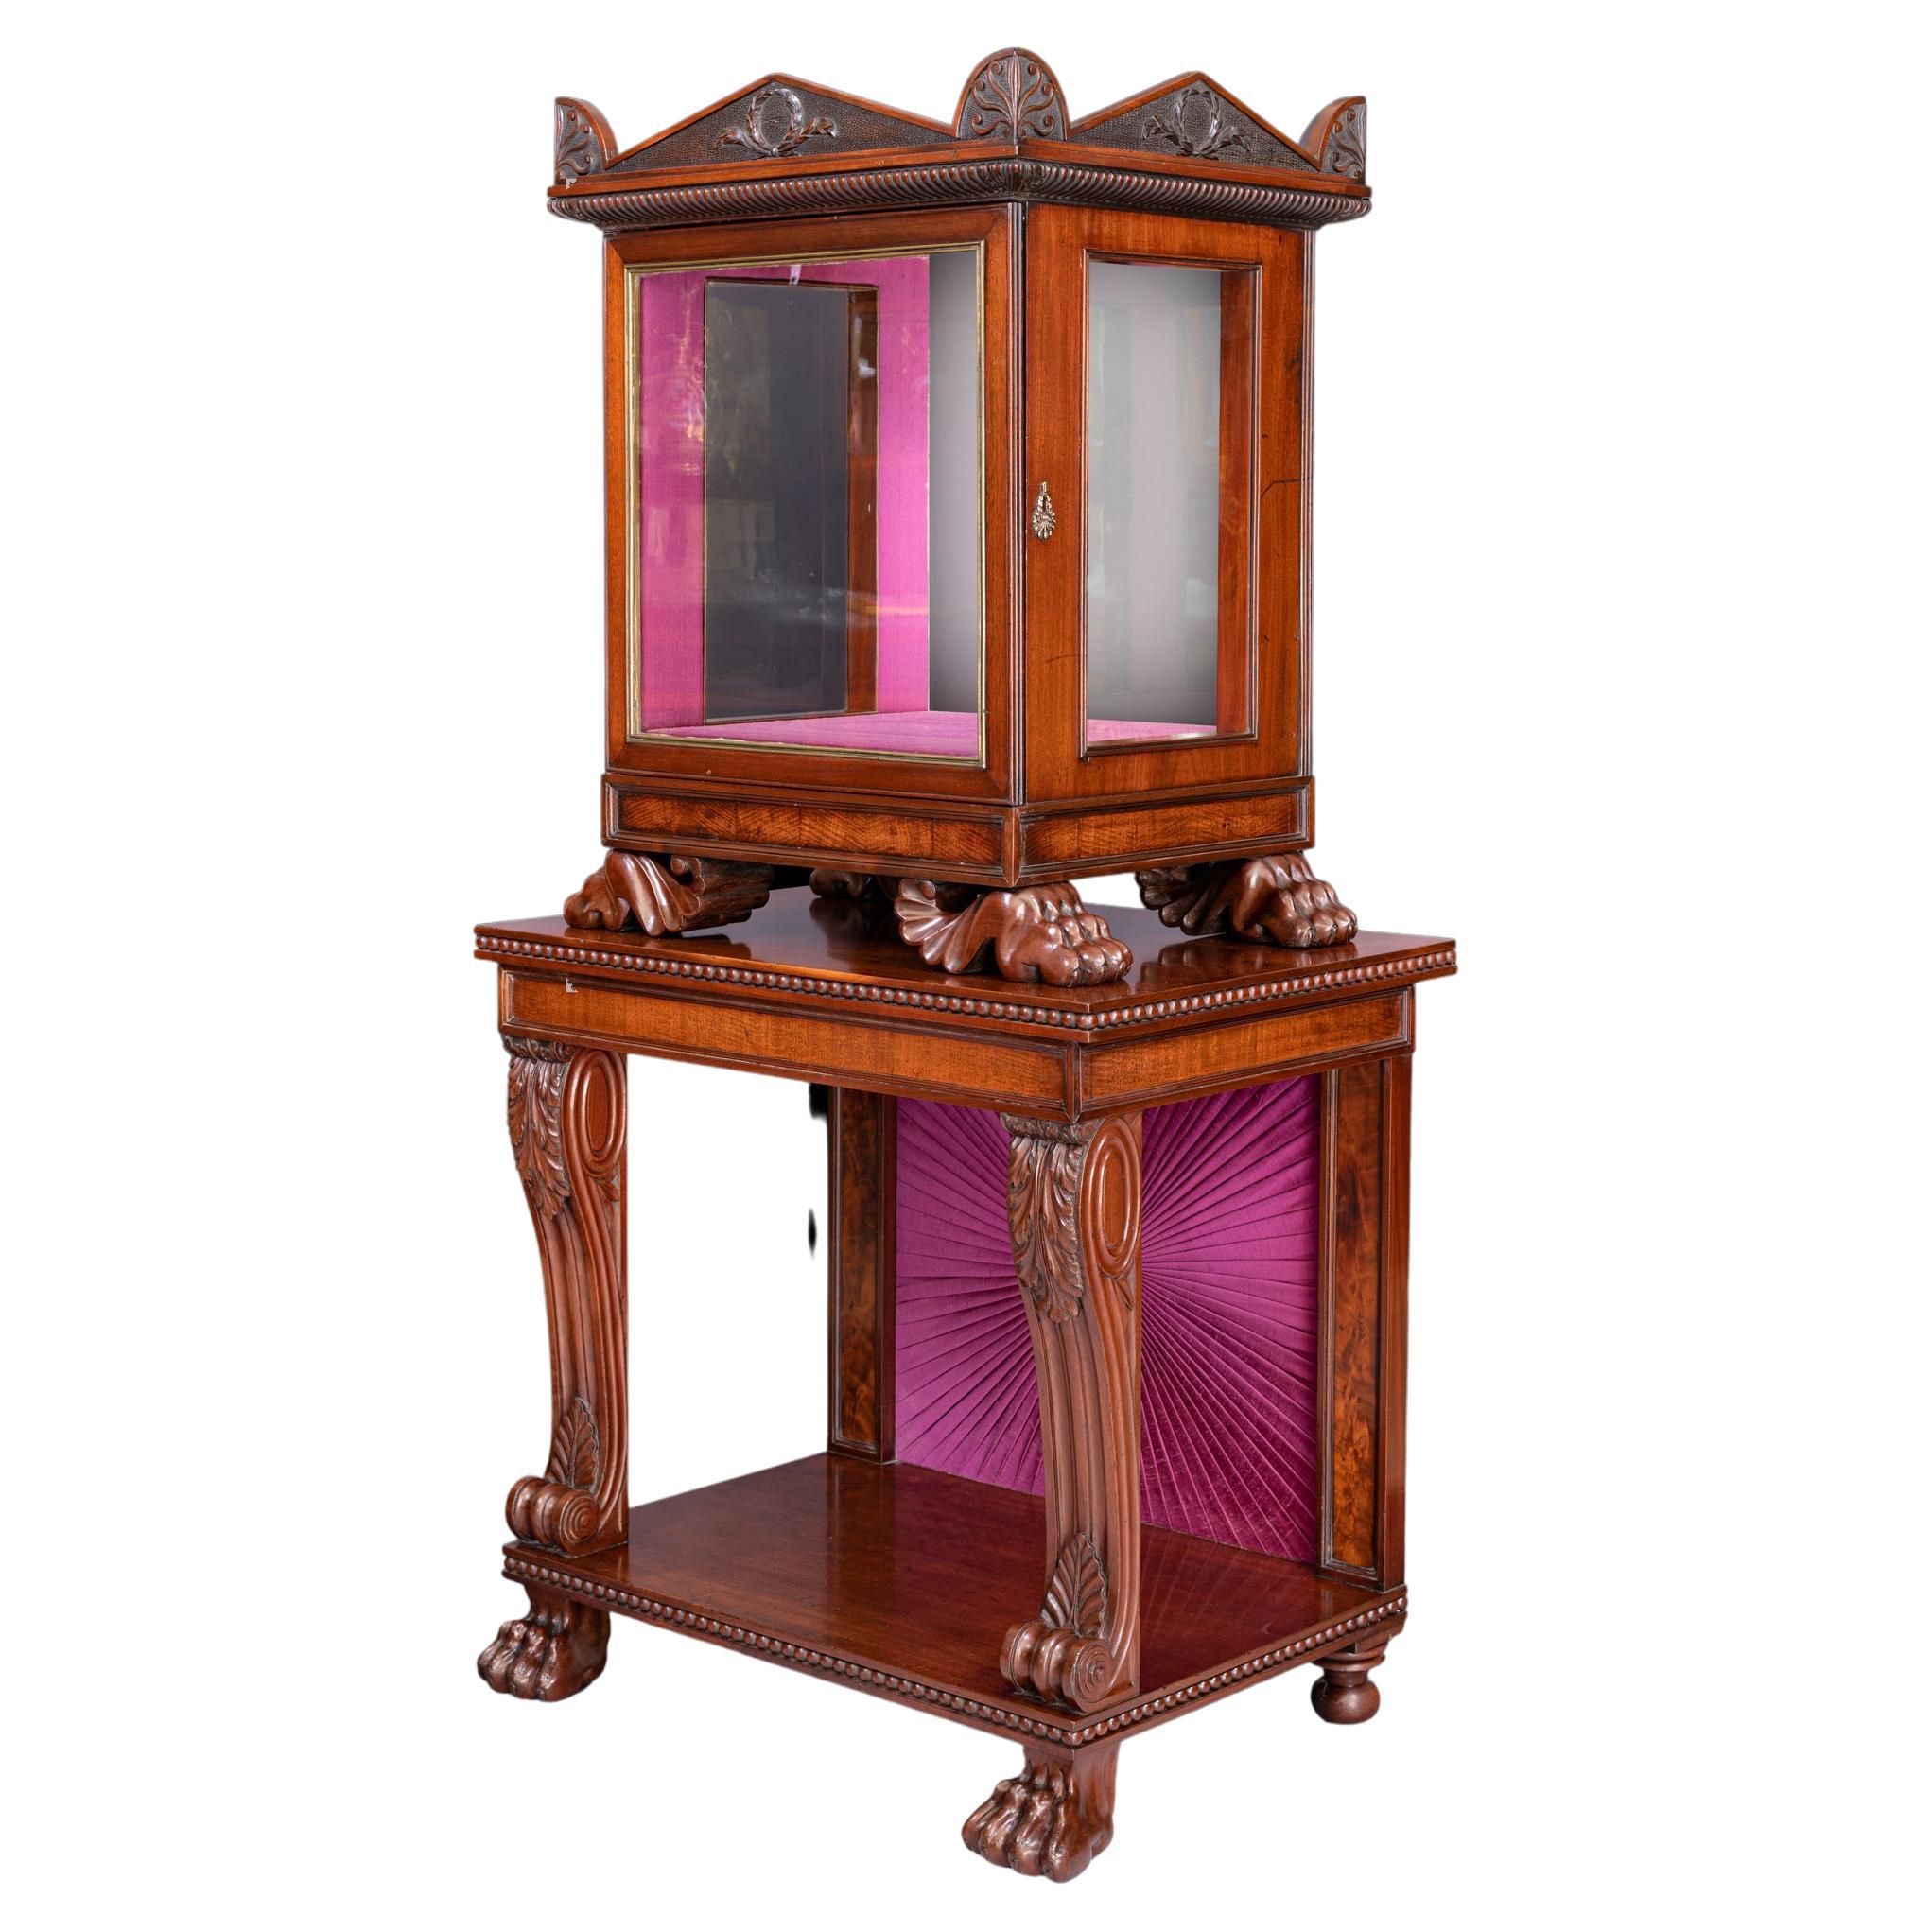 A very fine and most unusual Irish Regency mahogany display cabinet by Gillington`s of Dublin. The architectural shaped top above a glazed door for displaying purposes resting on four carved paw feet above a console style base with cabriole legs